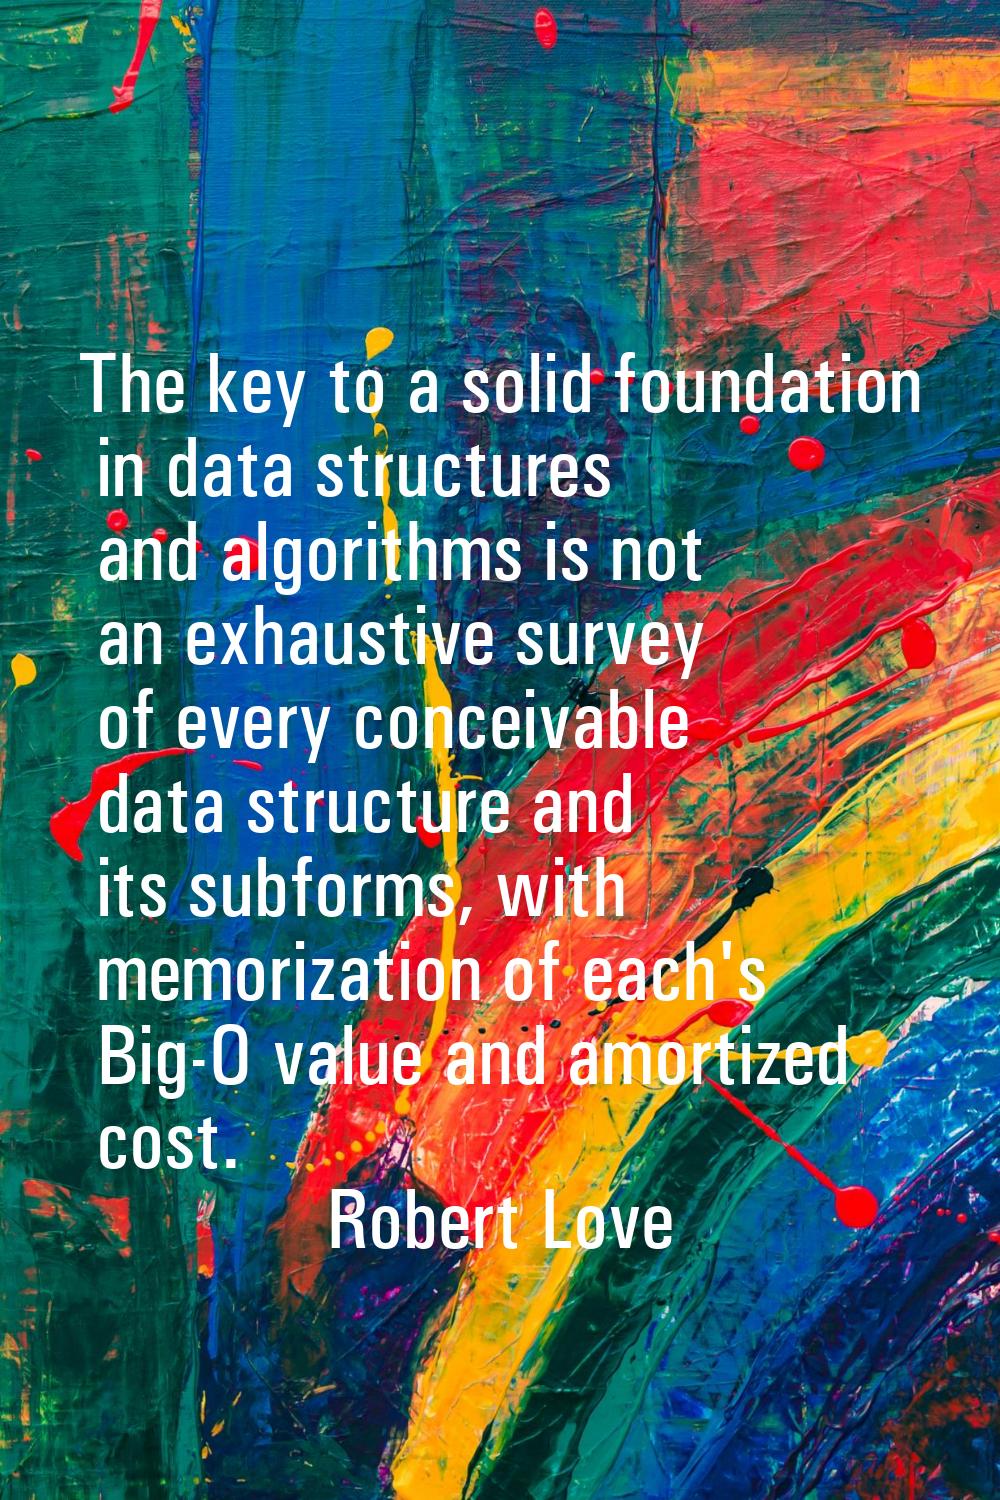 The key to a solid foundation in data structures and algorithms is not an exhaustive survey of ever